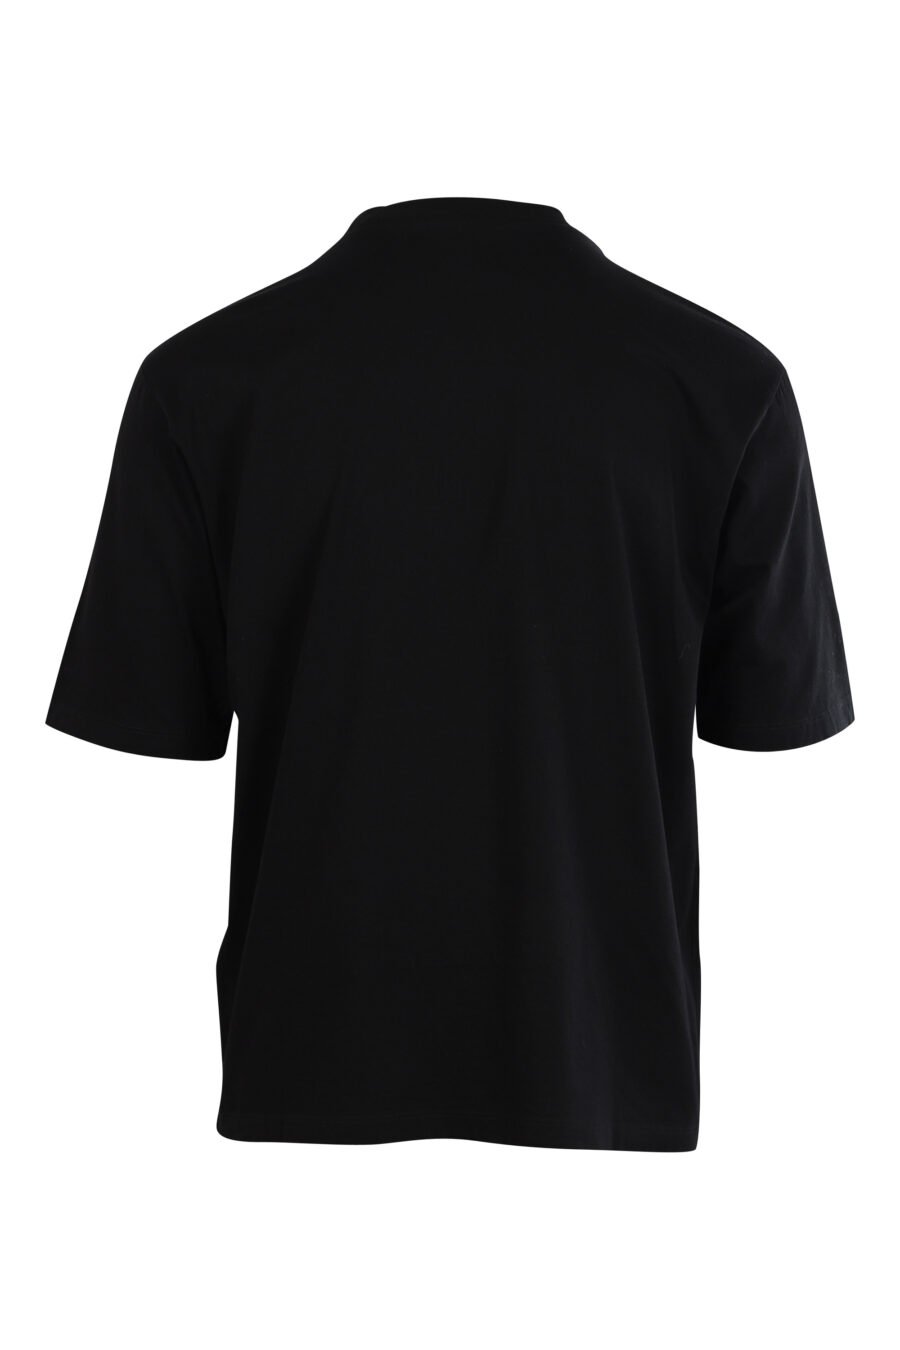 Black "Oversized" T-shirt with contrasting logo - 8054148006570 2